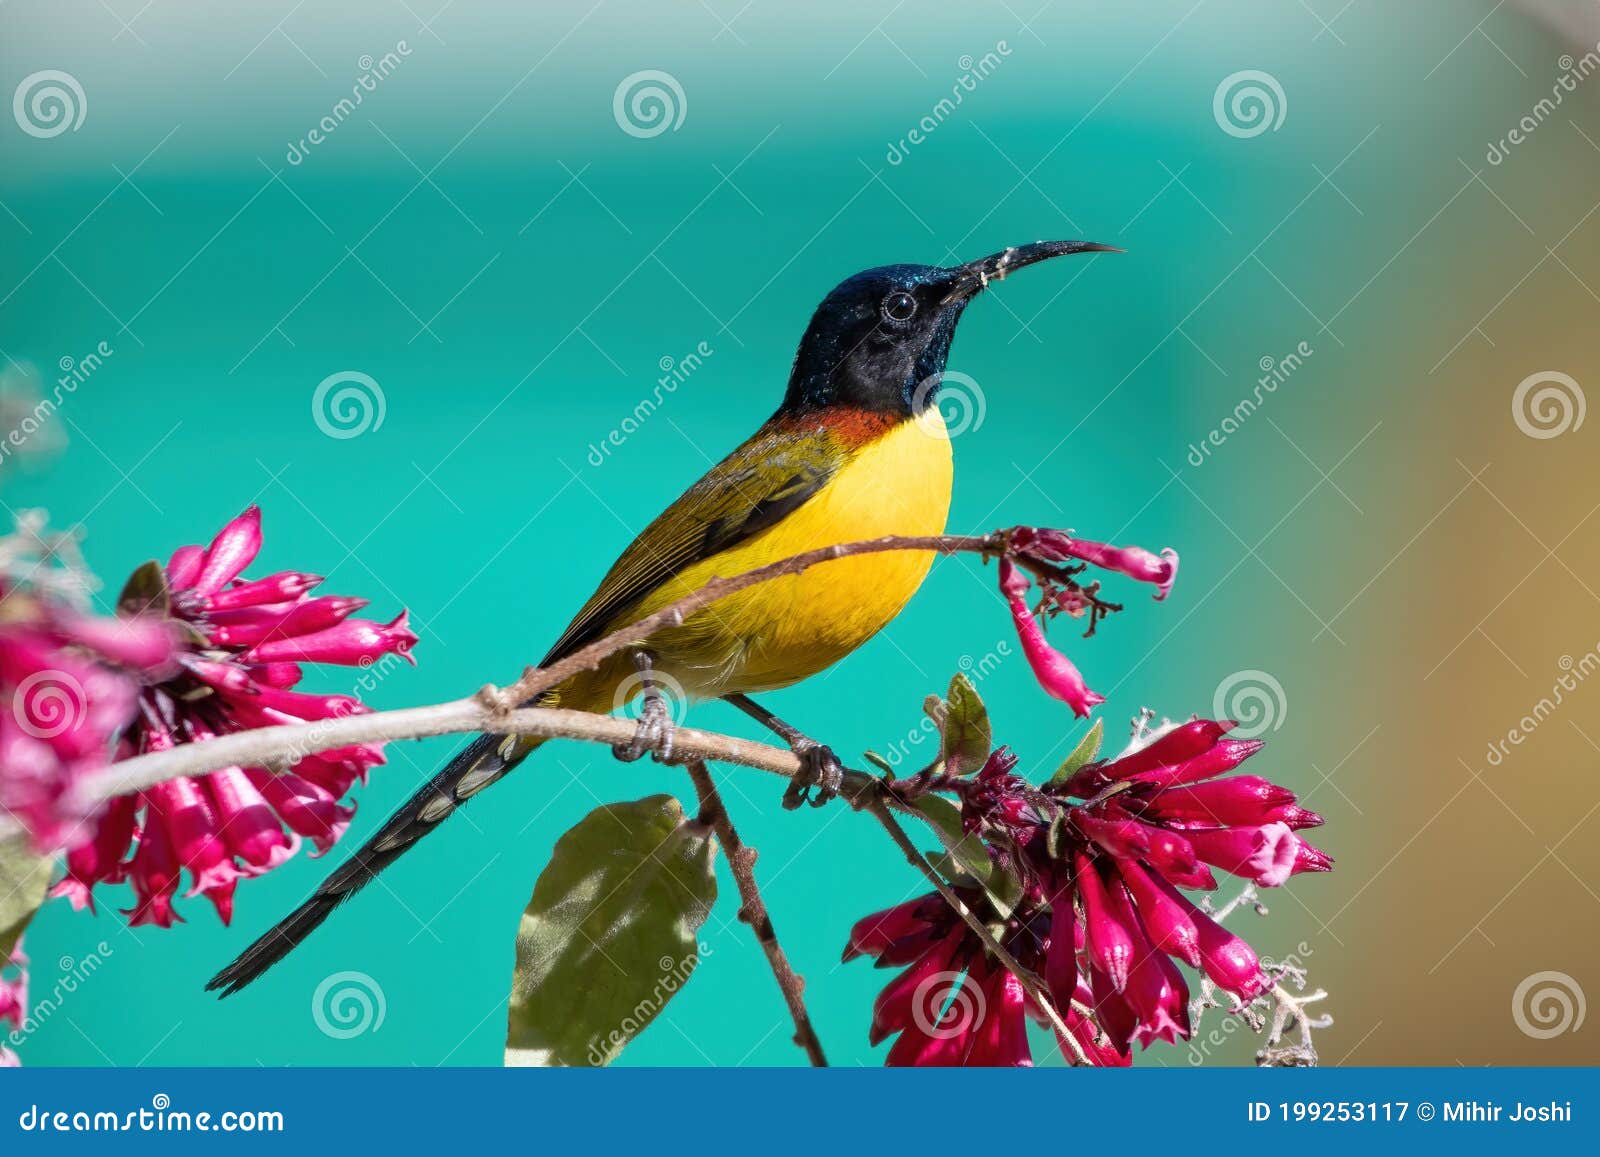 Male Green-tailed Sunbird Photographed in Sattal, India Stock Image ...